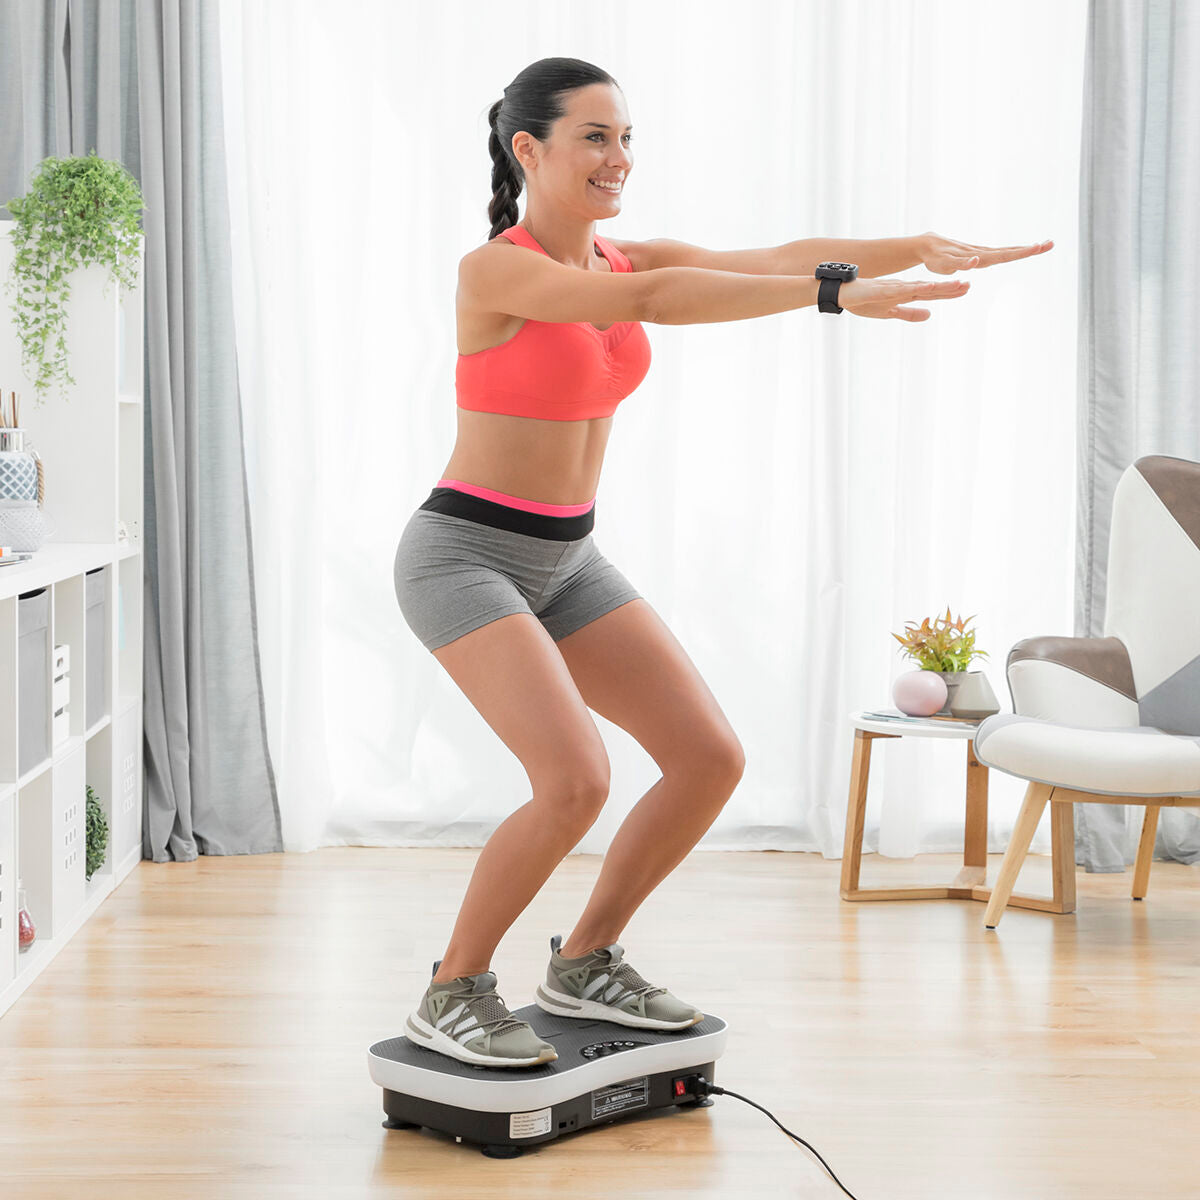 Vibration Training Plate with Accessories and Exercise Guide Vybeform InnovaGoods